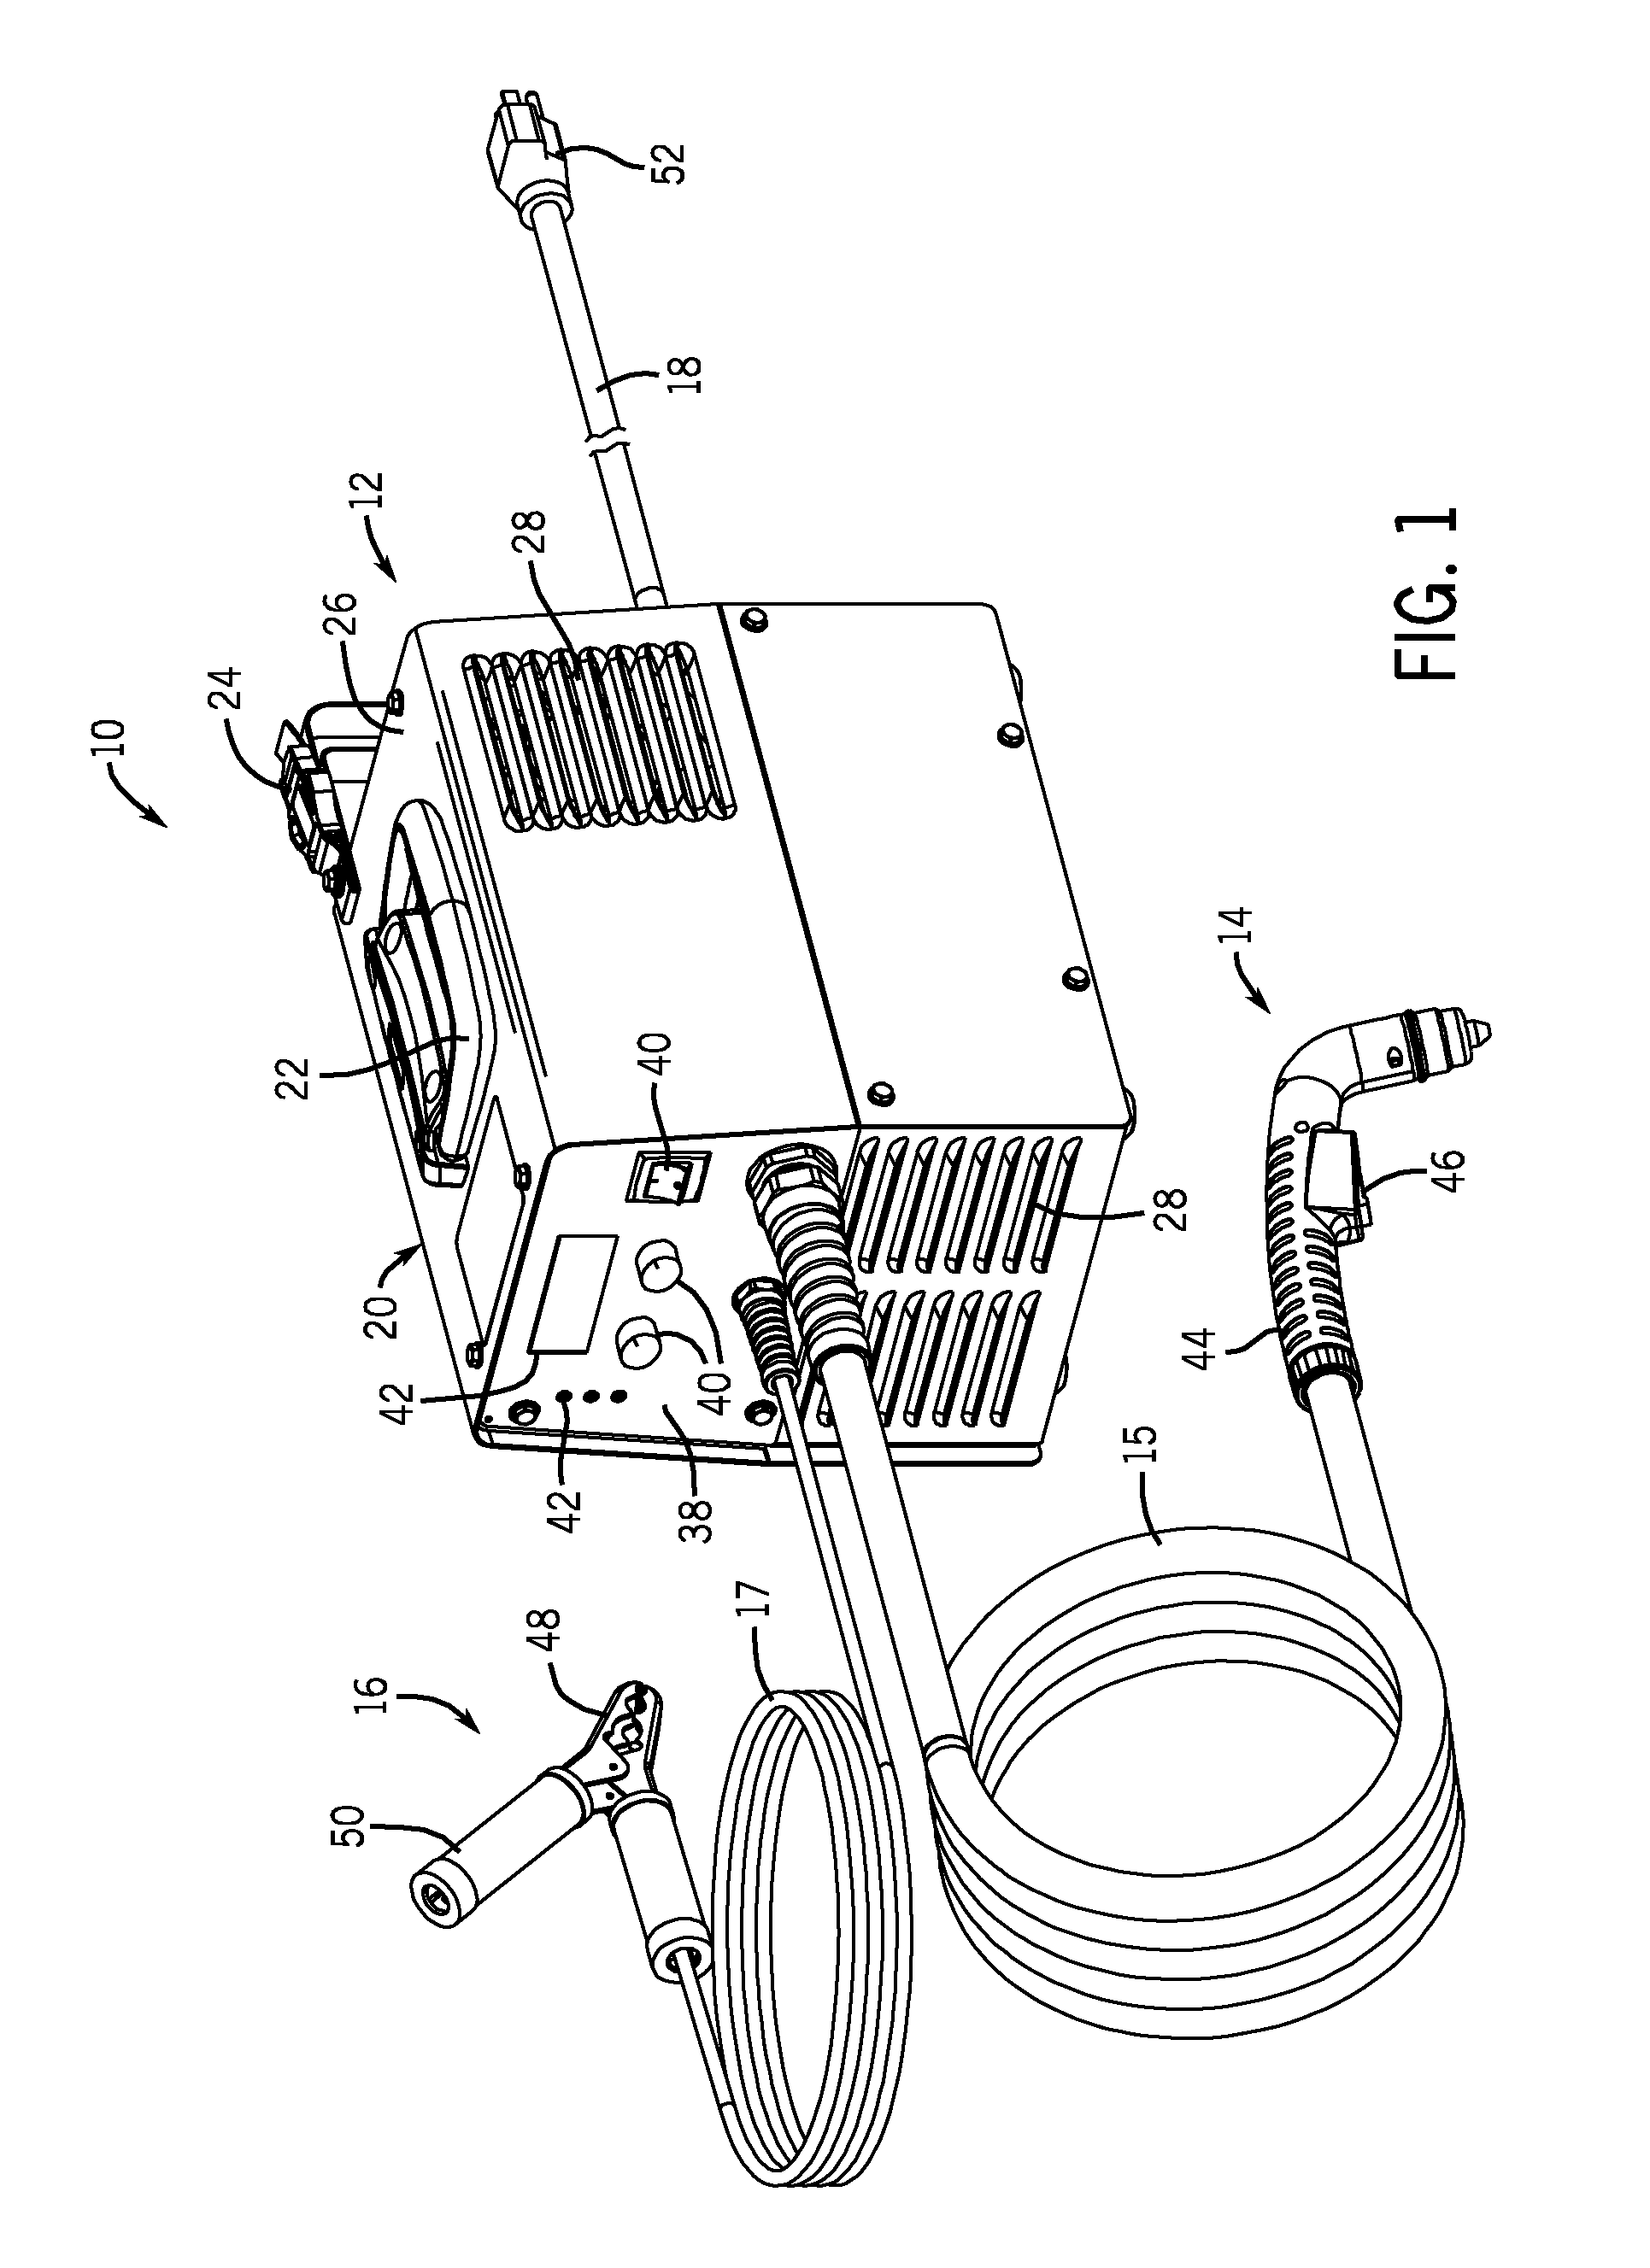 Plasma torch and retaining cap with fast securing threads